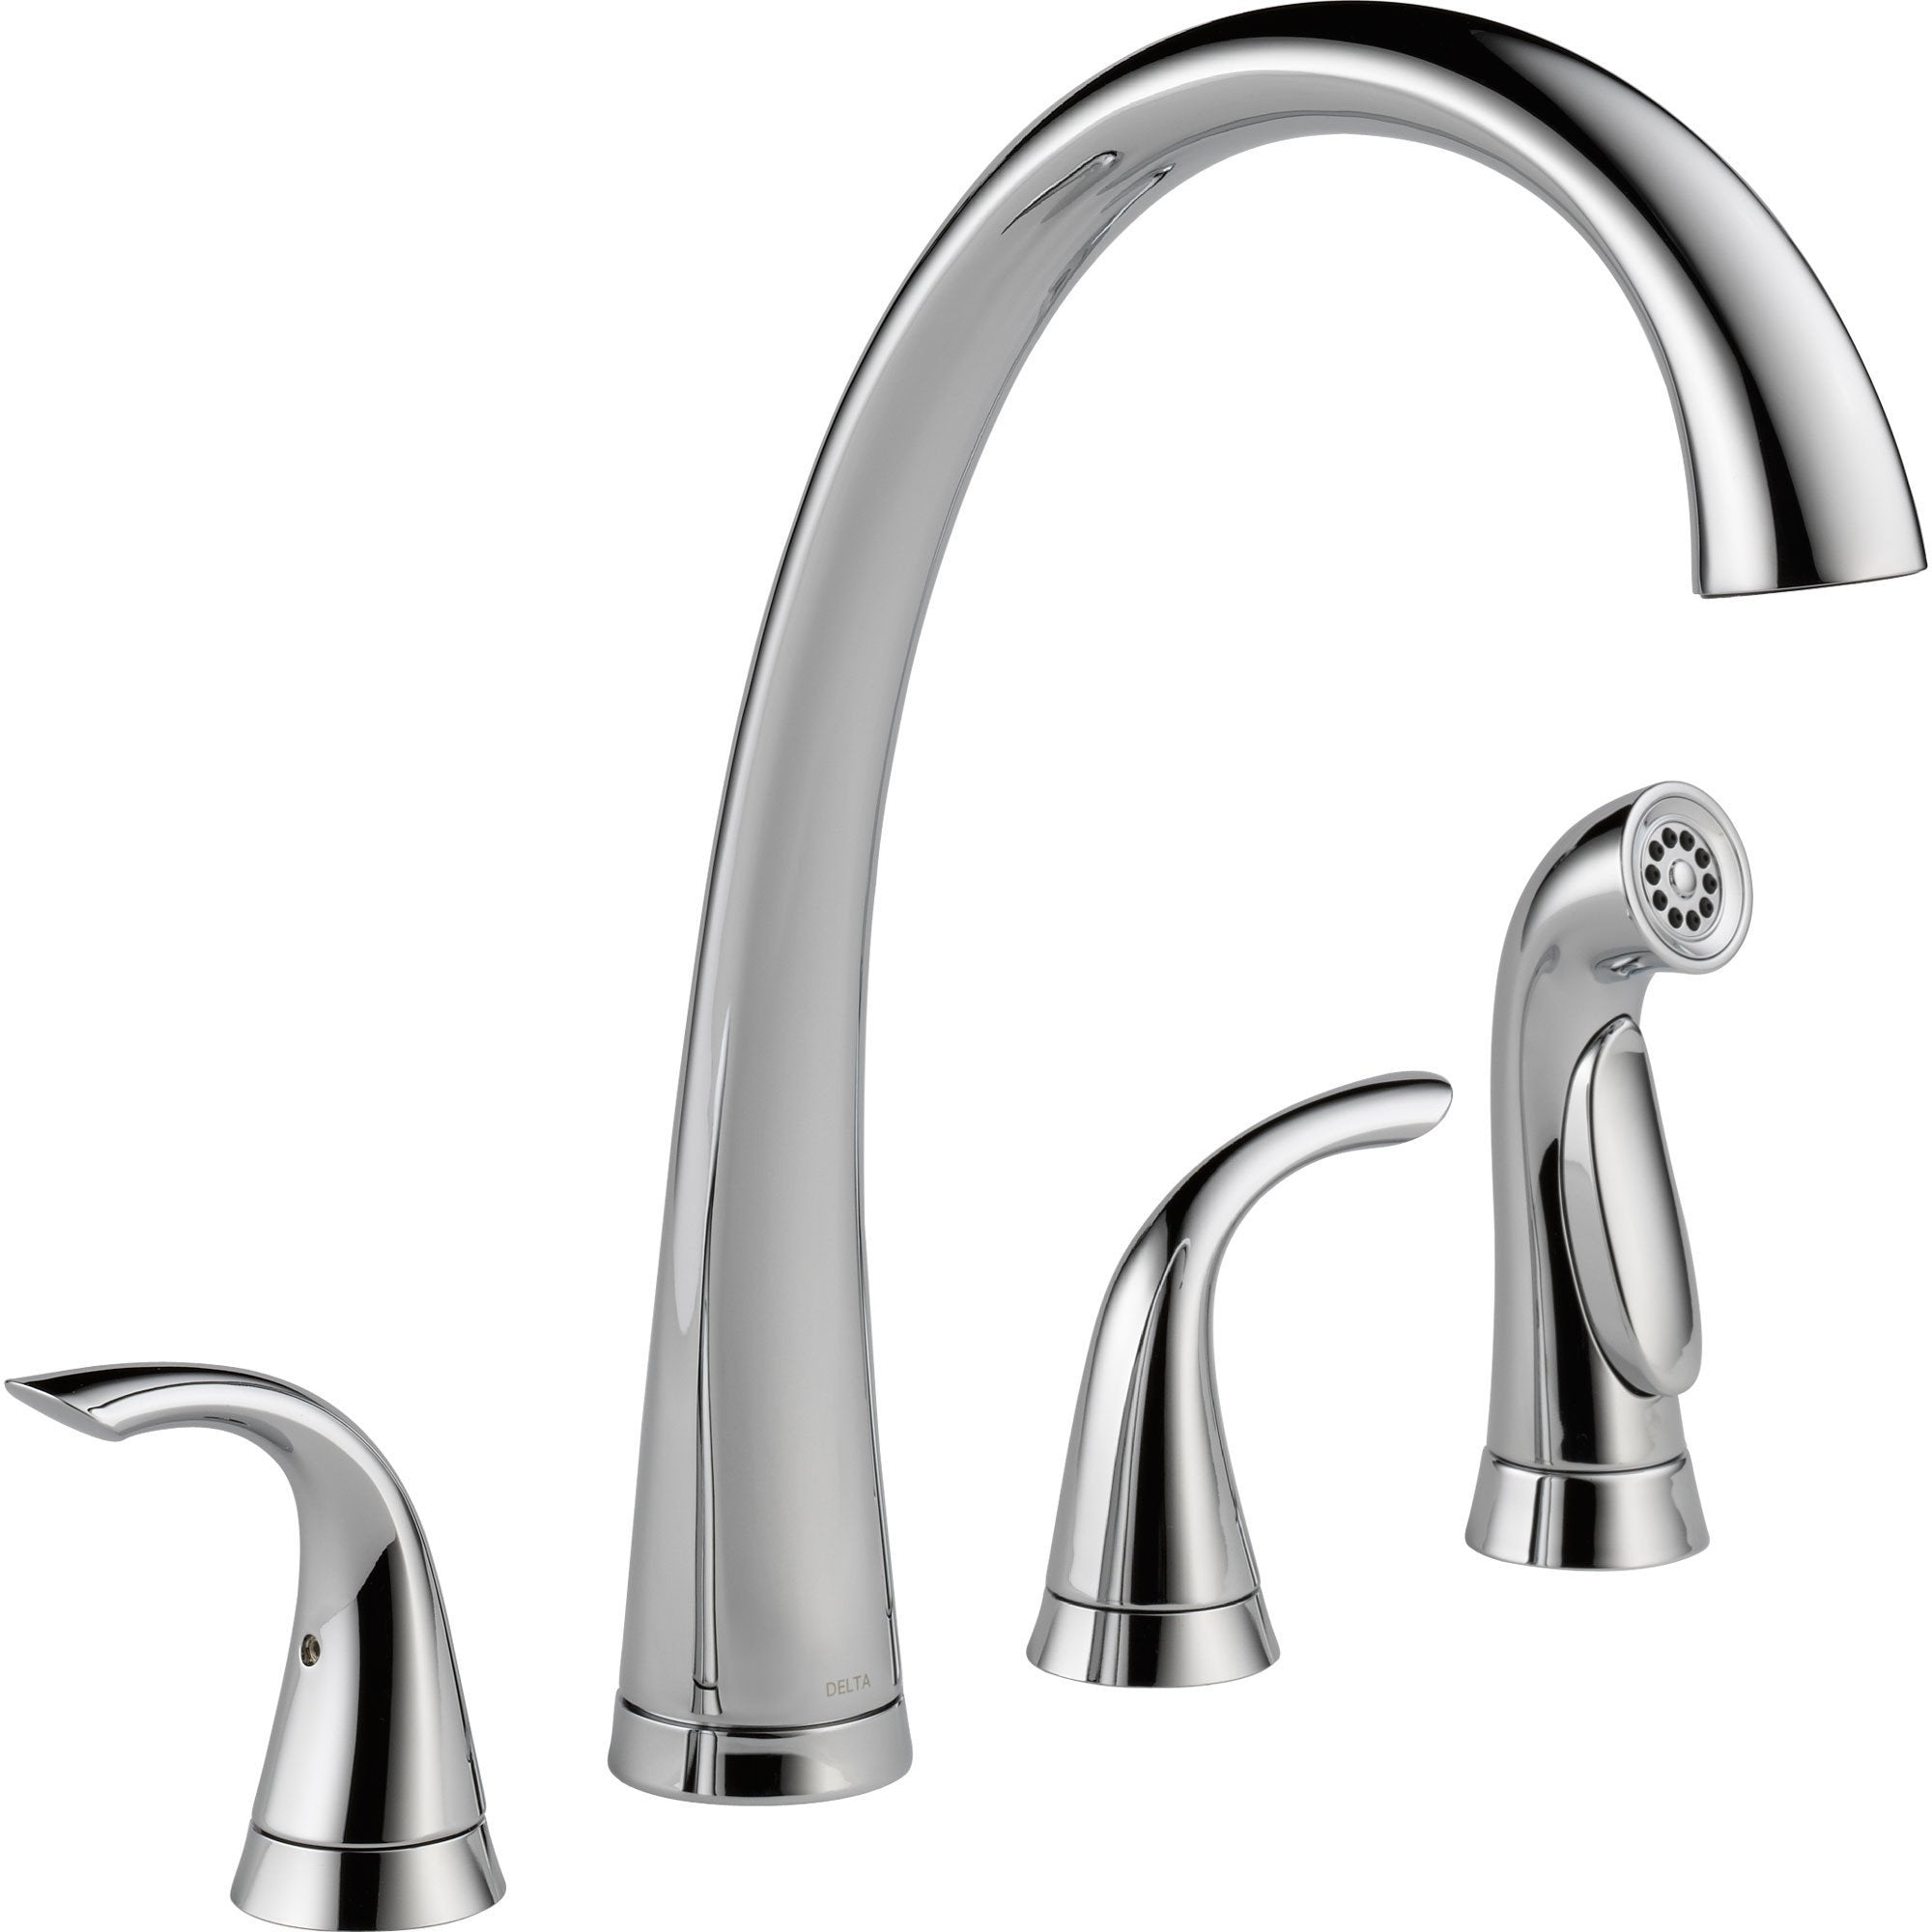 Delta Chrome High Arch Spout Widespread Kitchen Sink Faucet with Spray 555818